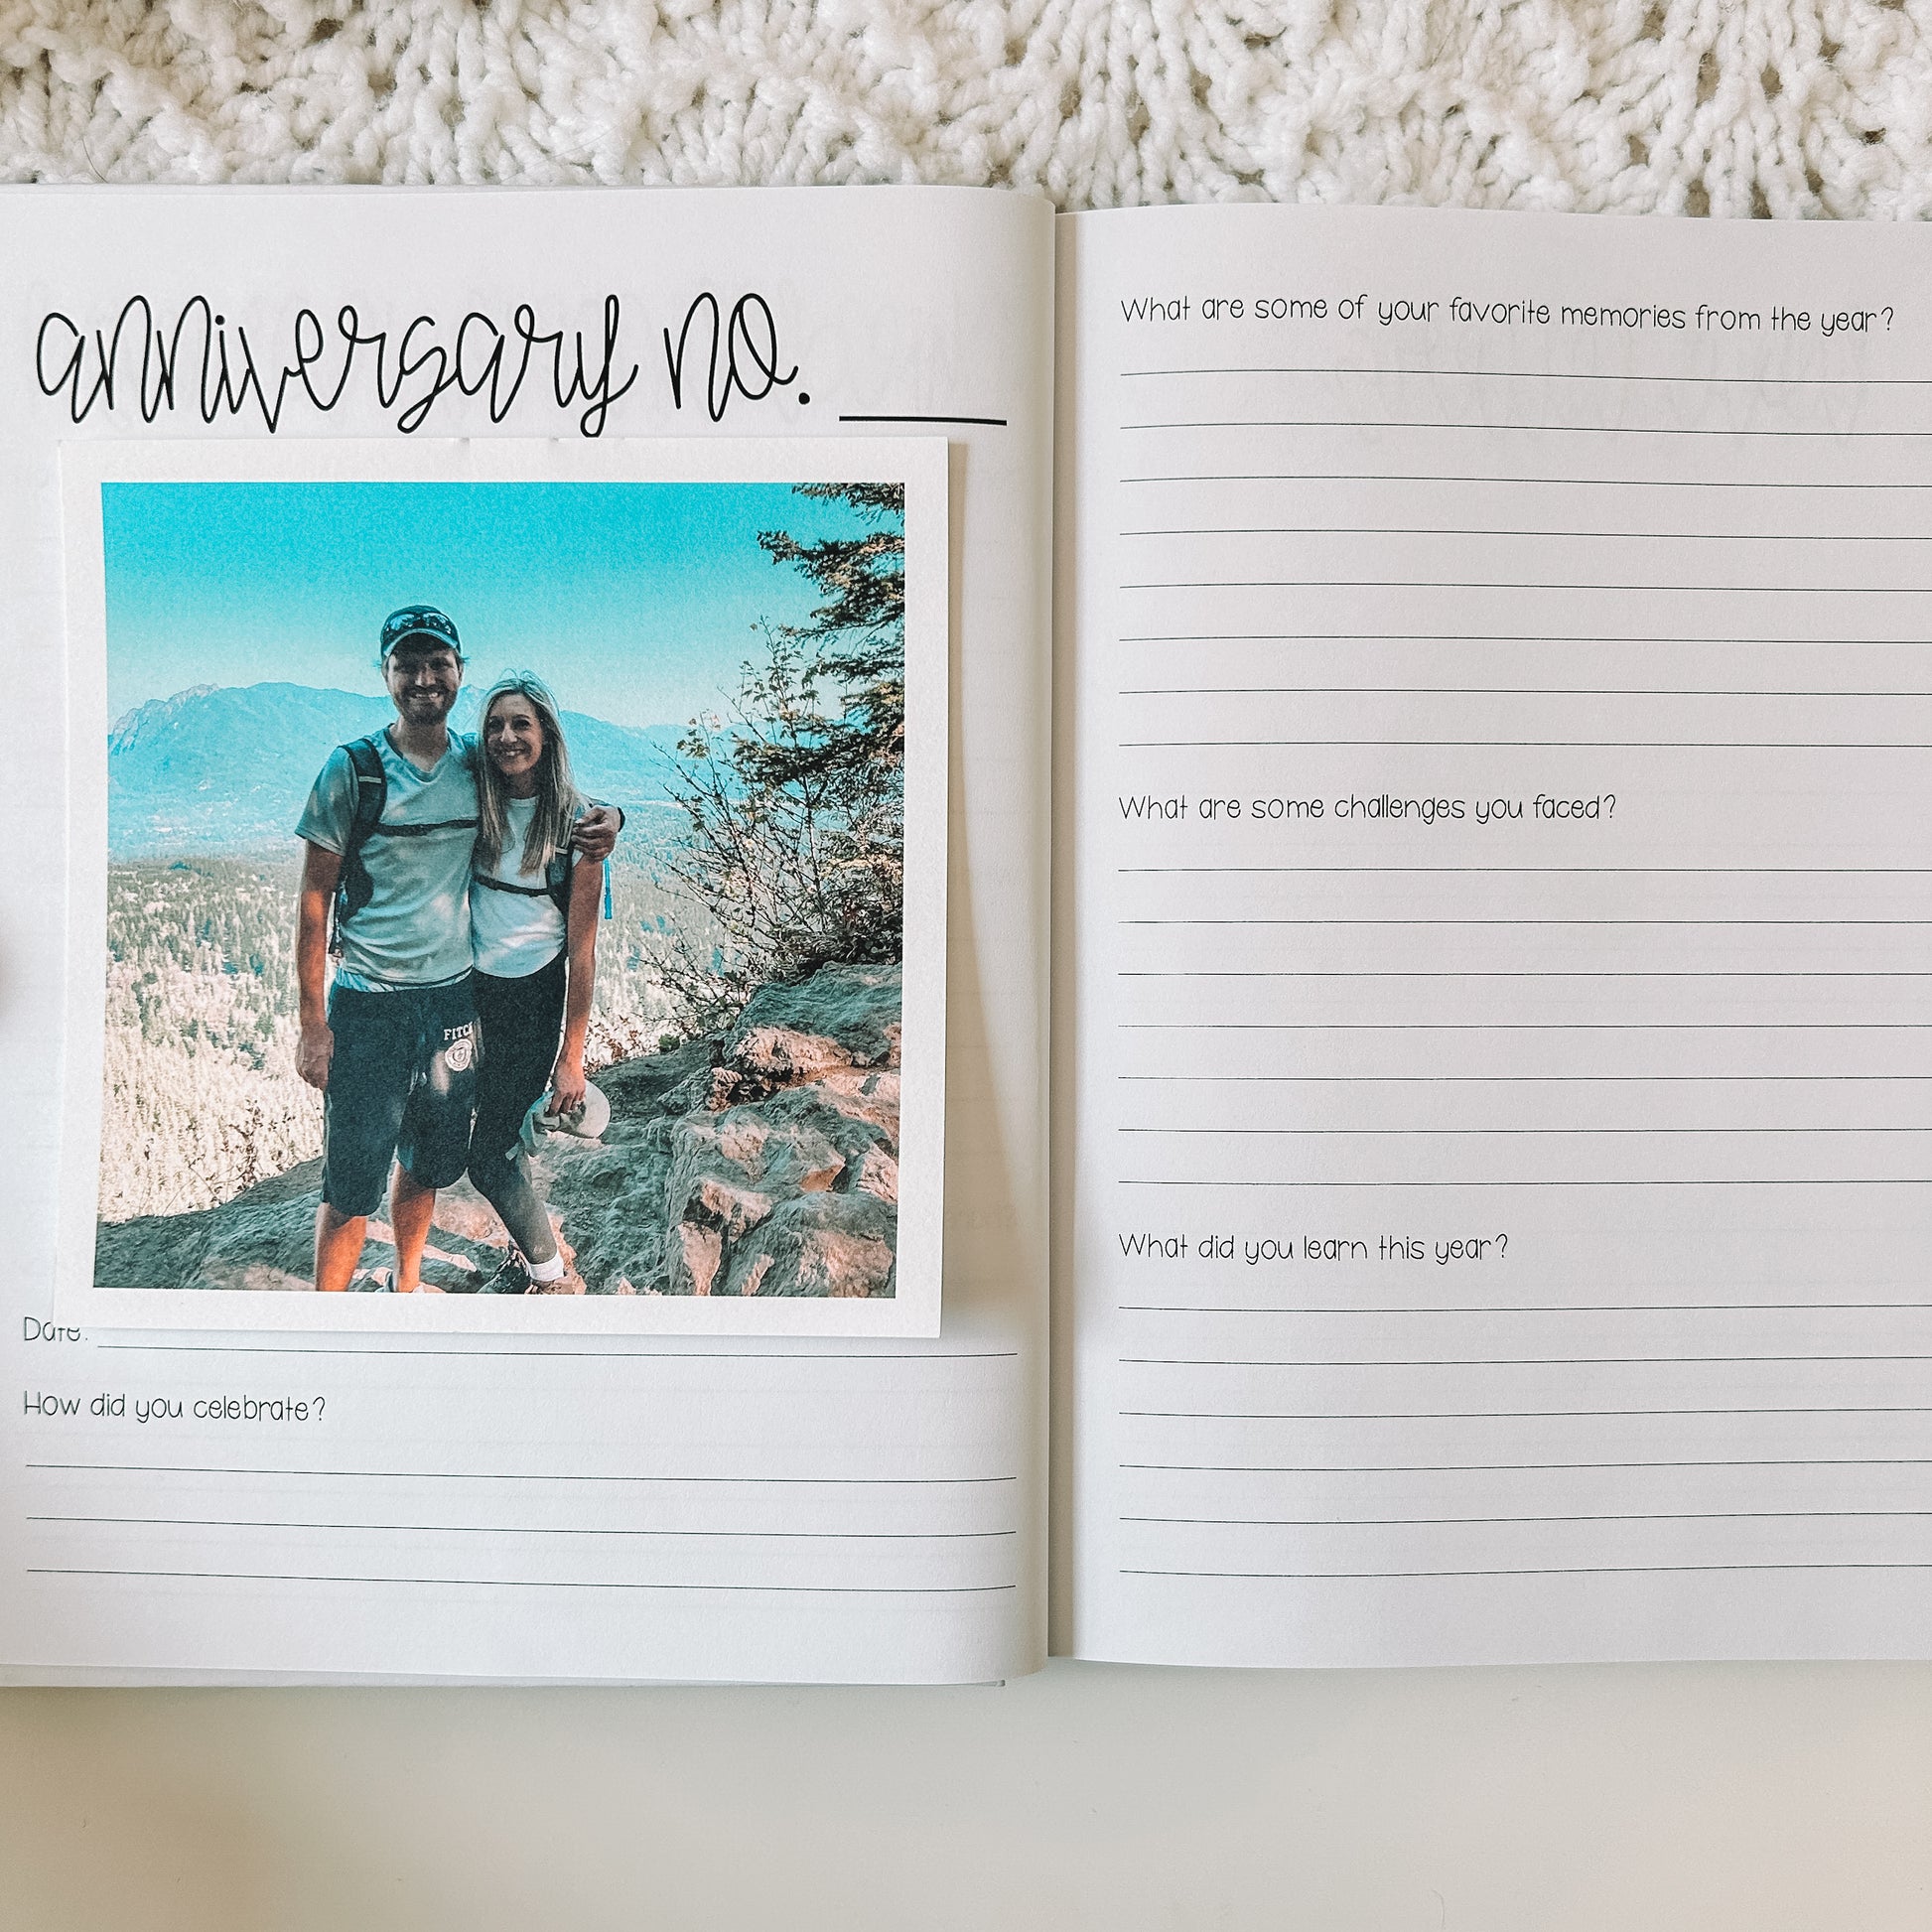 Two page spread in prompted anniversary journal. Left page is titled anniversary no. with a line next to it. There is photo with prompts beneath it. Right page has prompts with lines beneath the prompts.